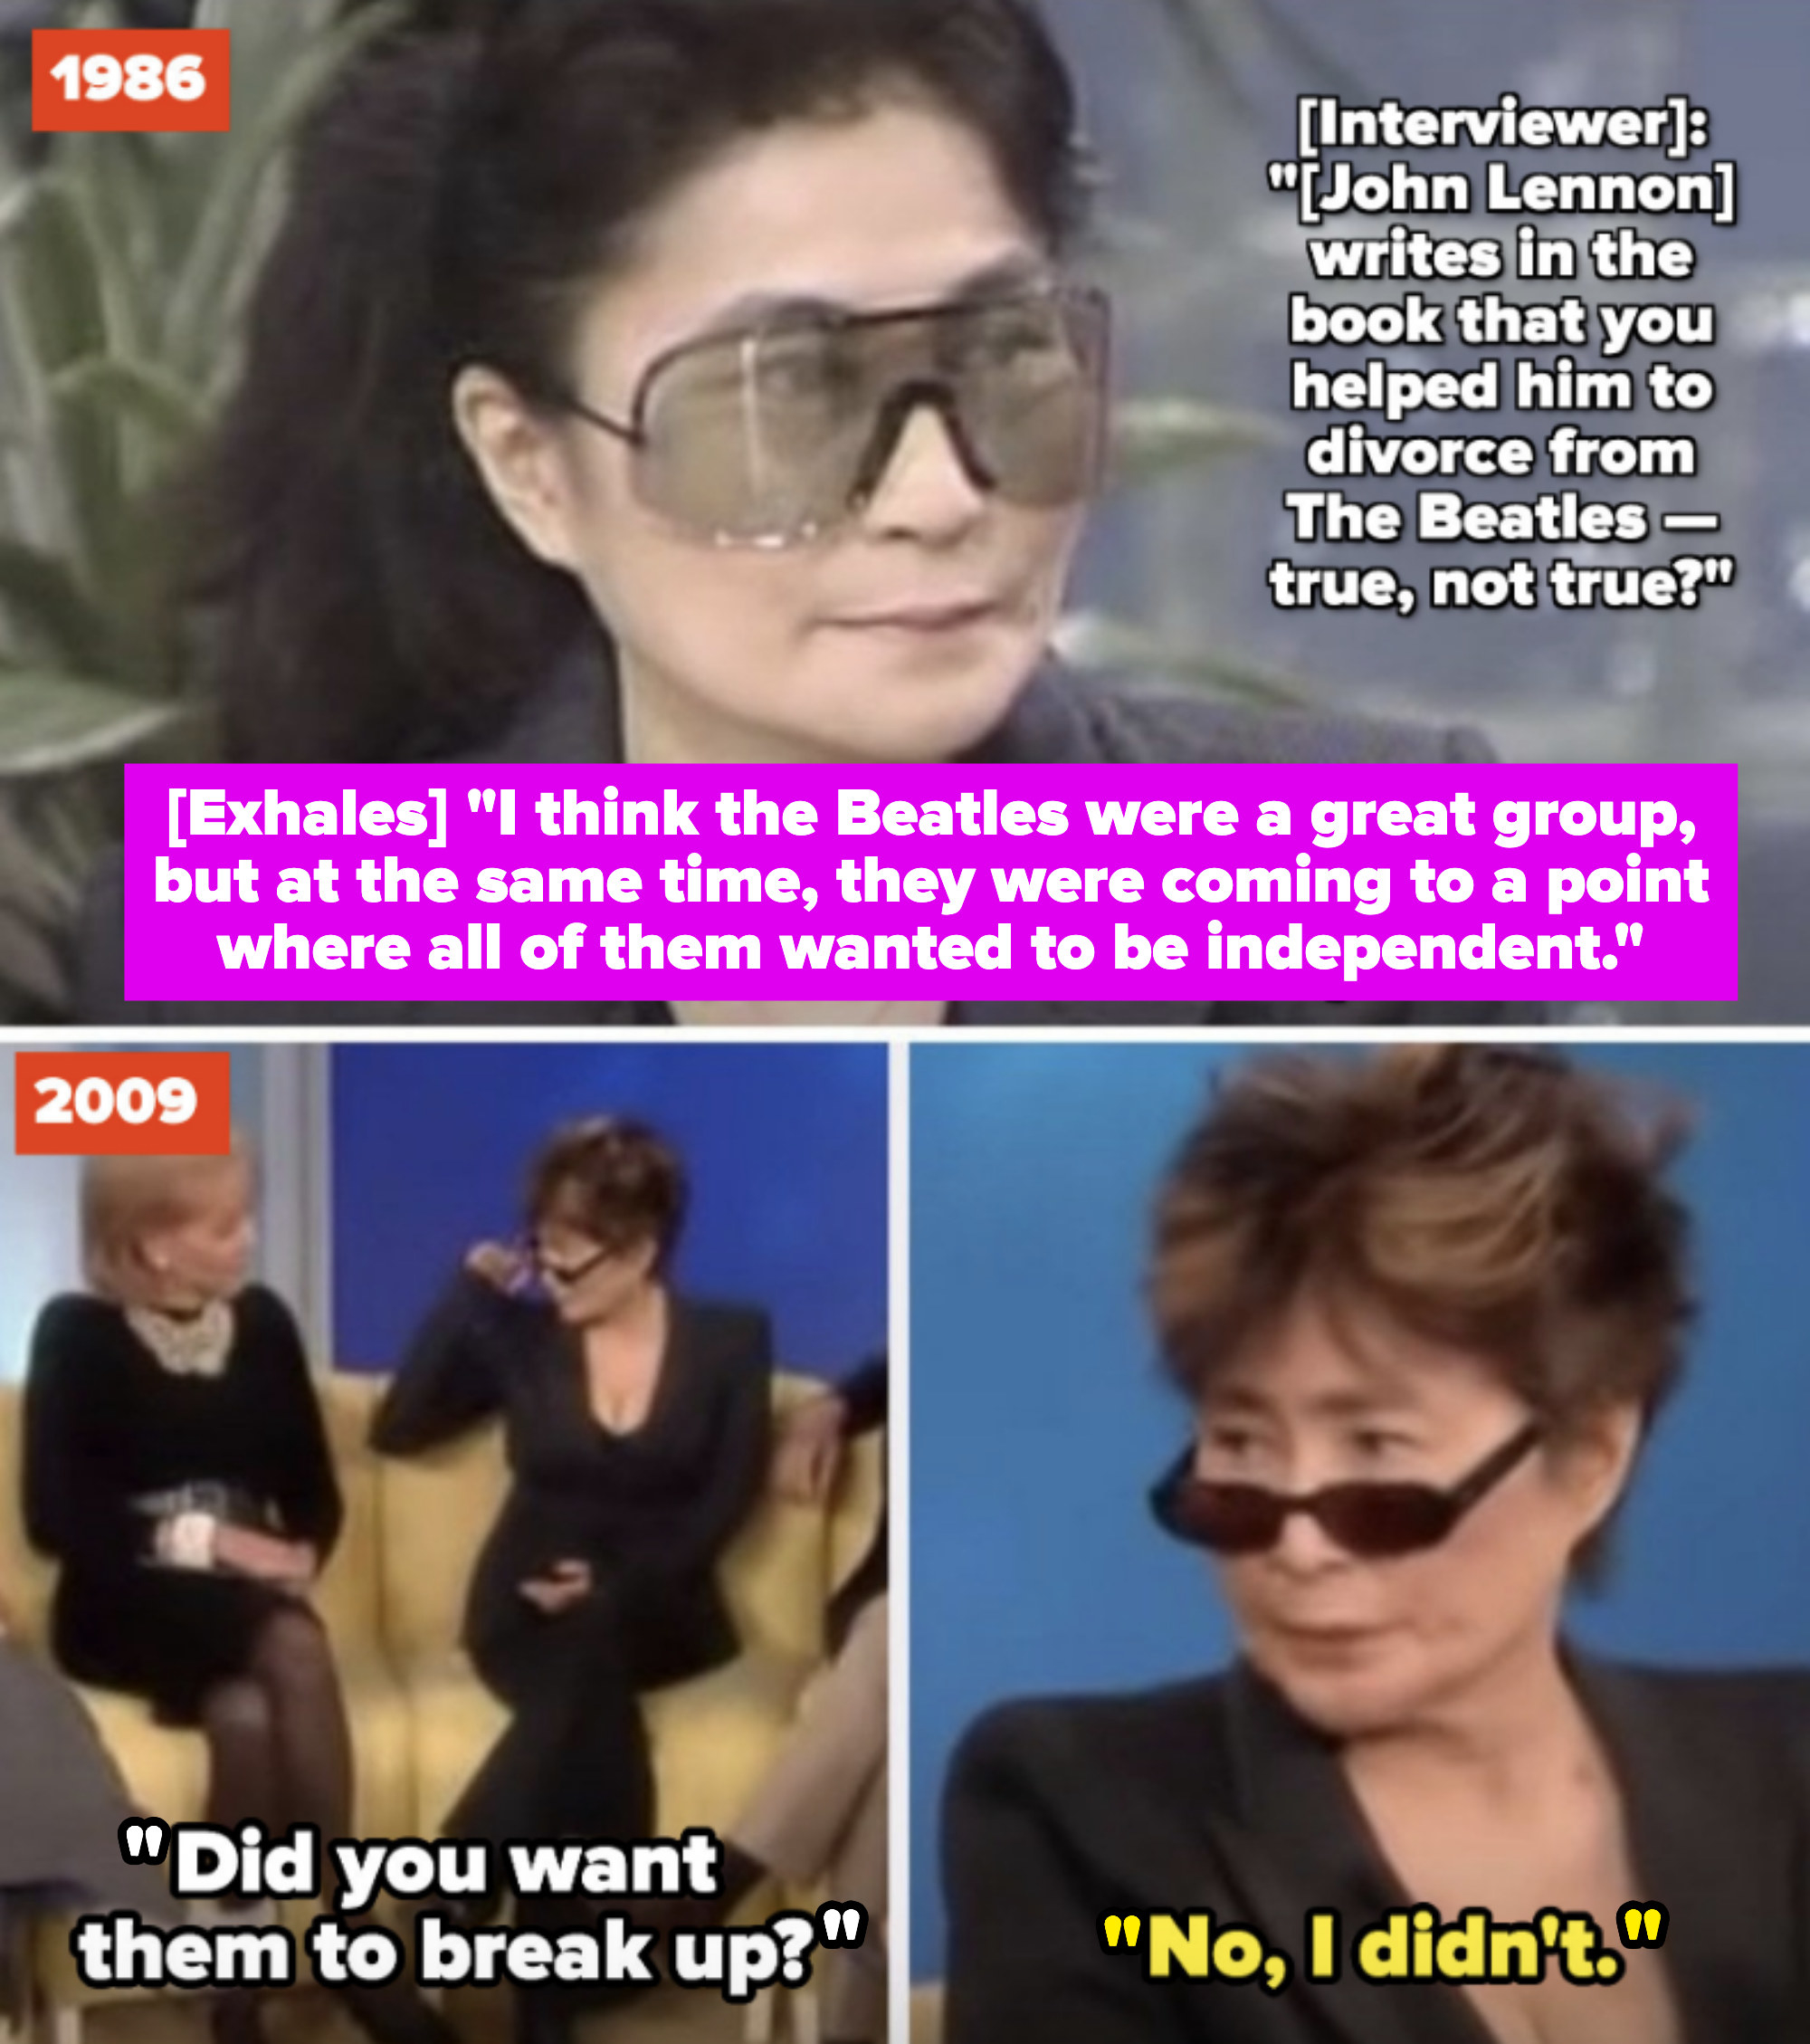 Ono being interviewed in the &#x27;80s; being interviewed in the &#x27;00s and saying that the Beatles were great but they were getting to a point where they all wanted to be independent, and she didn&#x27;t want them to break up